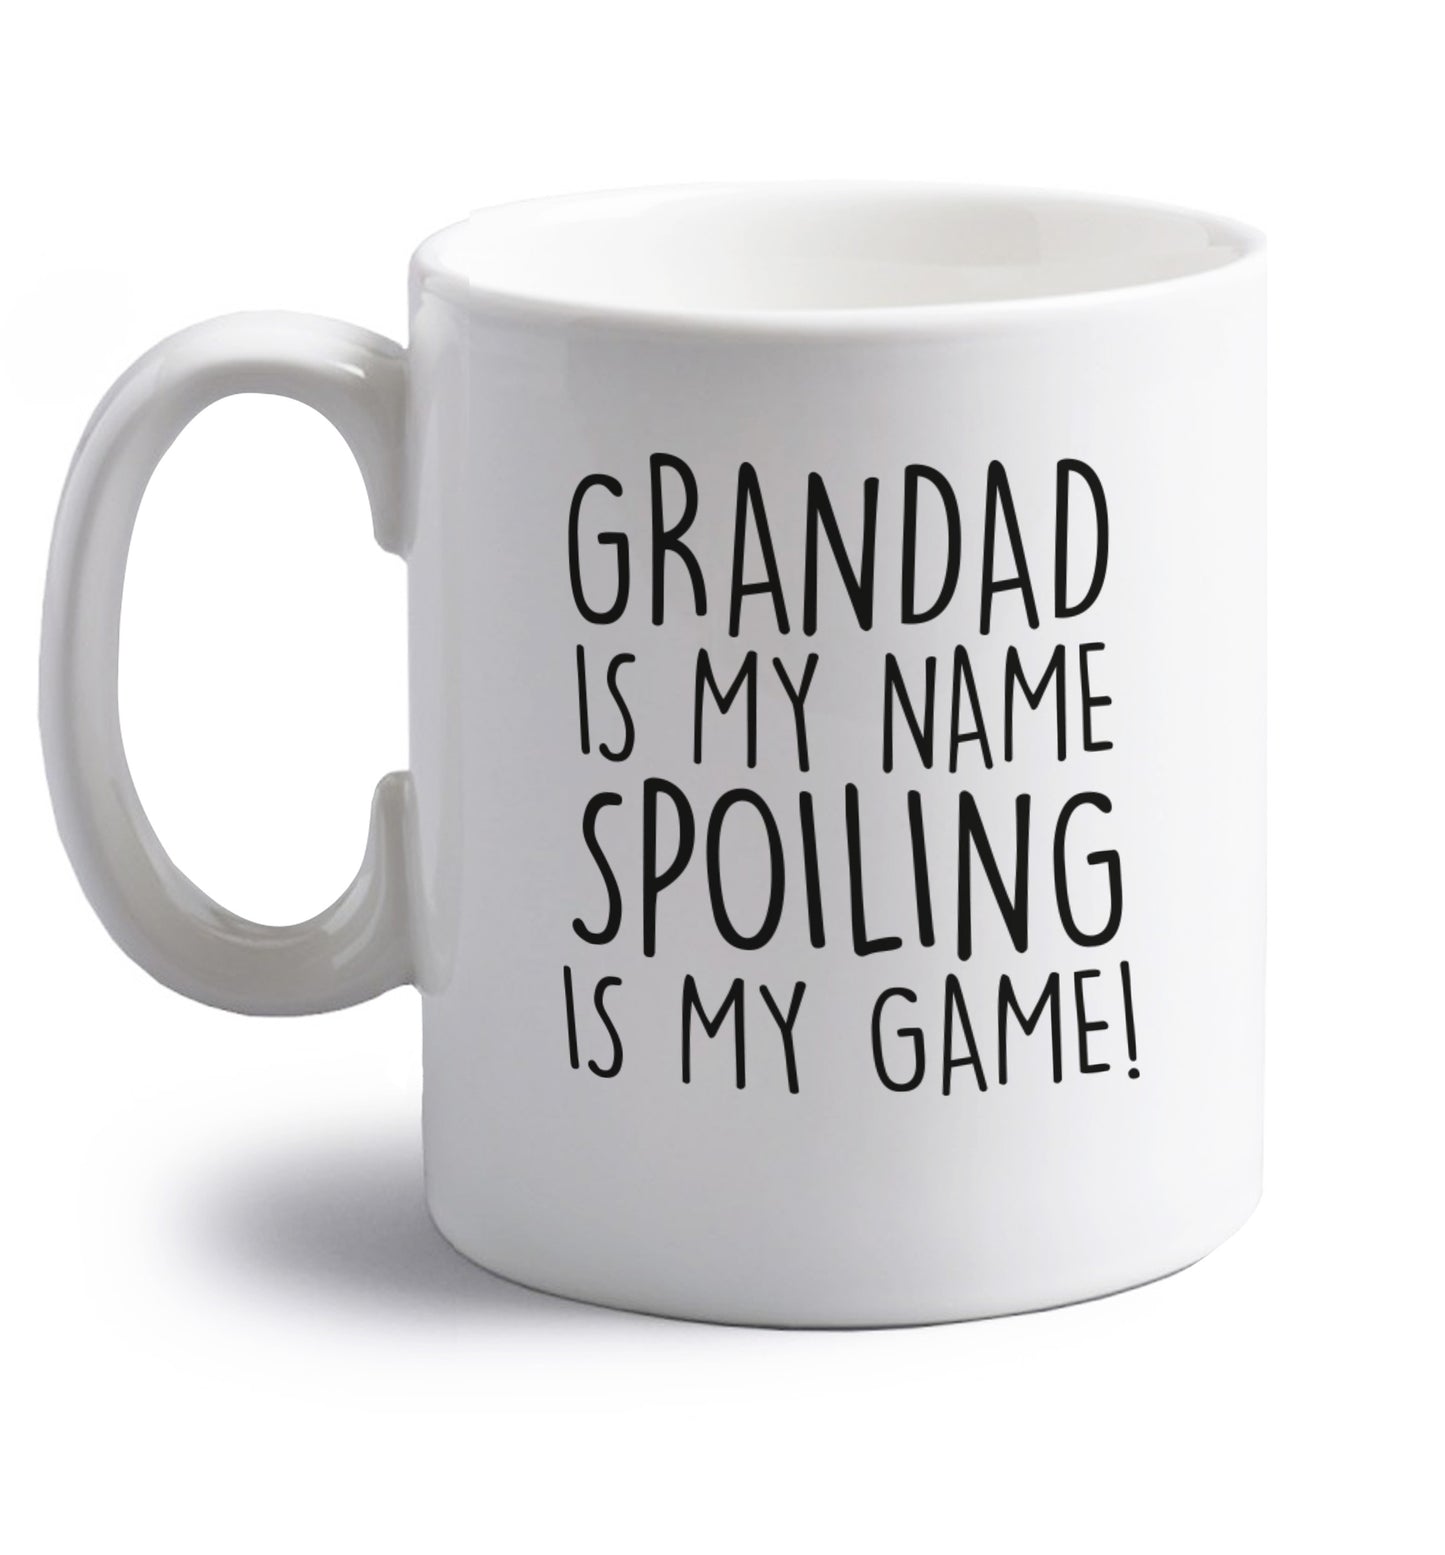 Grandad is my name, spoiling is my game right handed white ceramic mug 